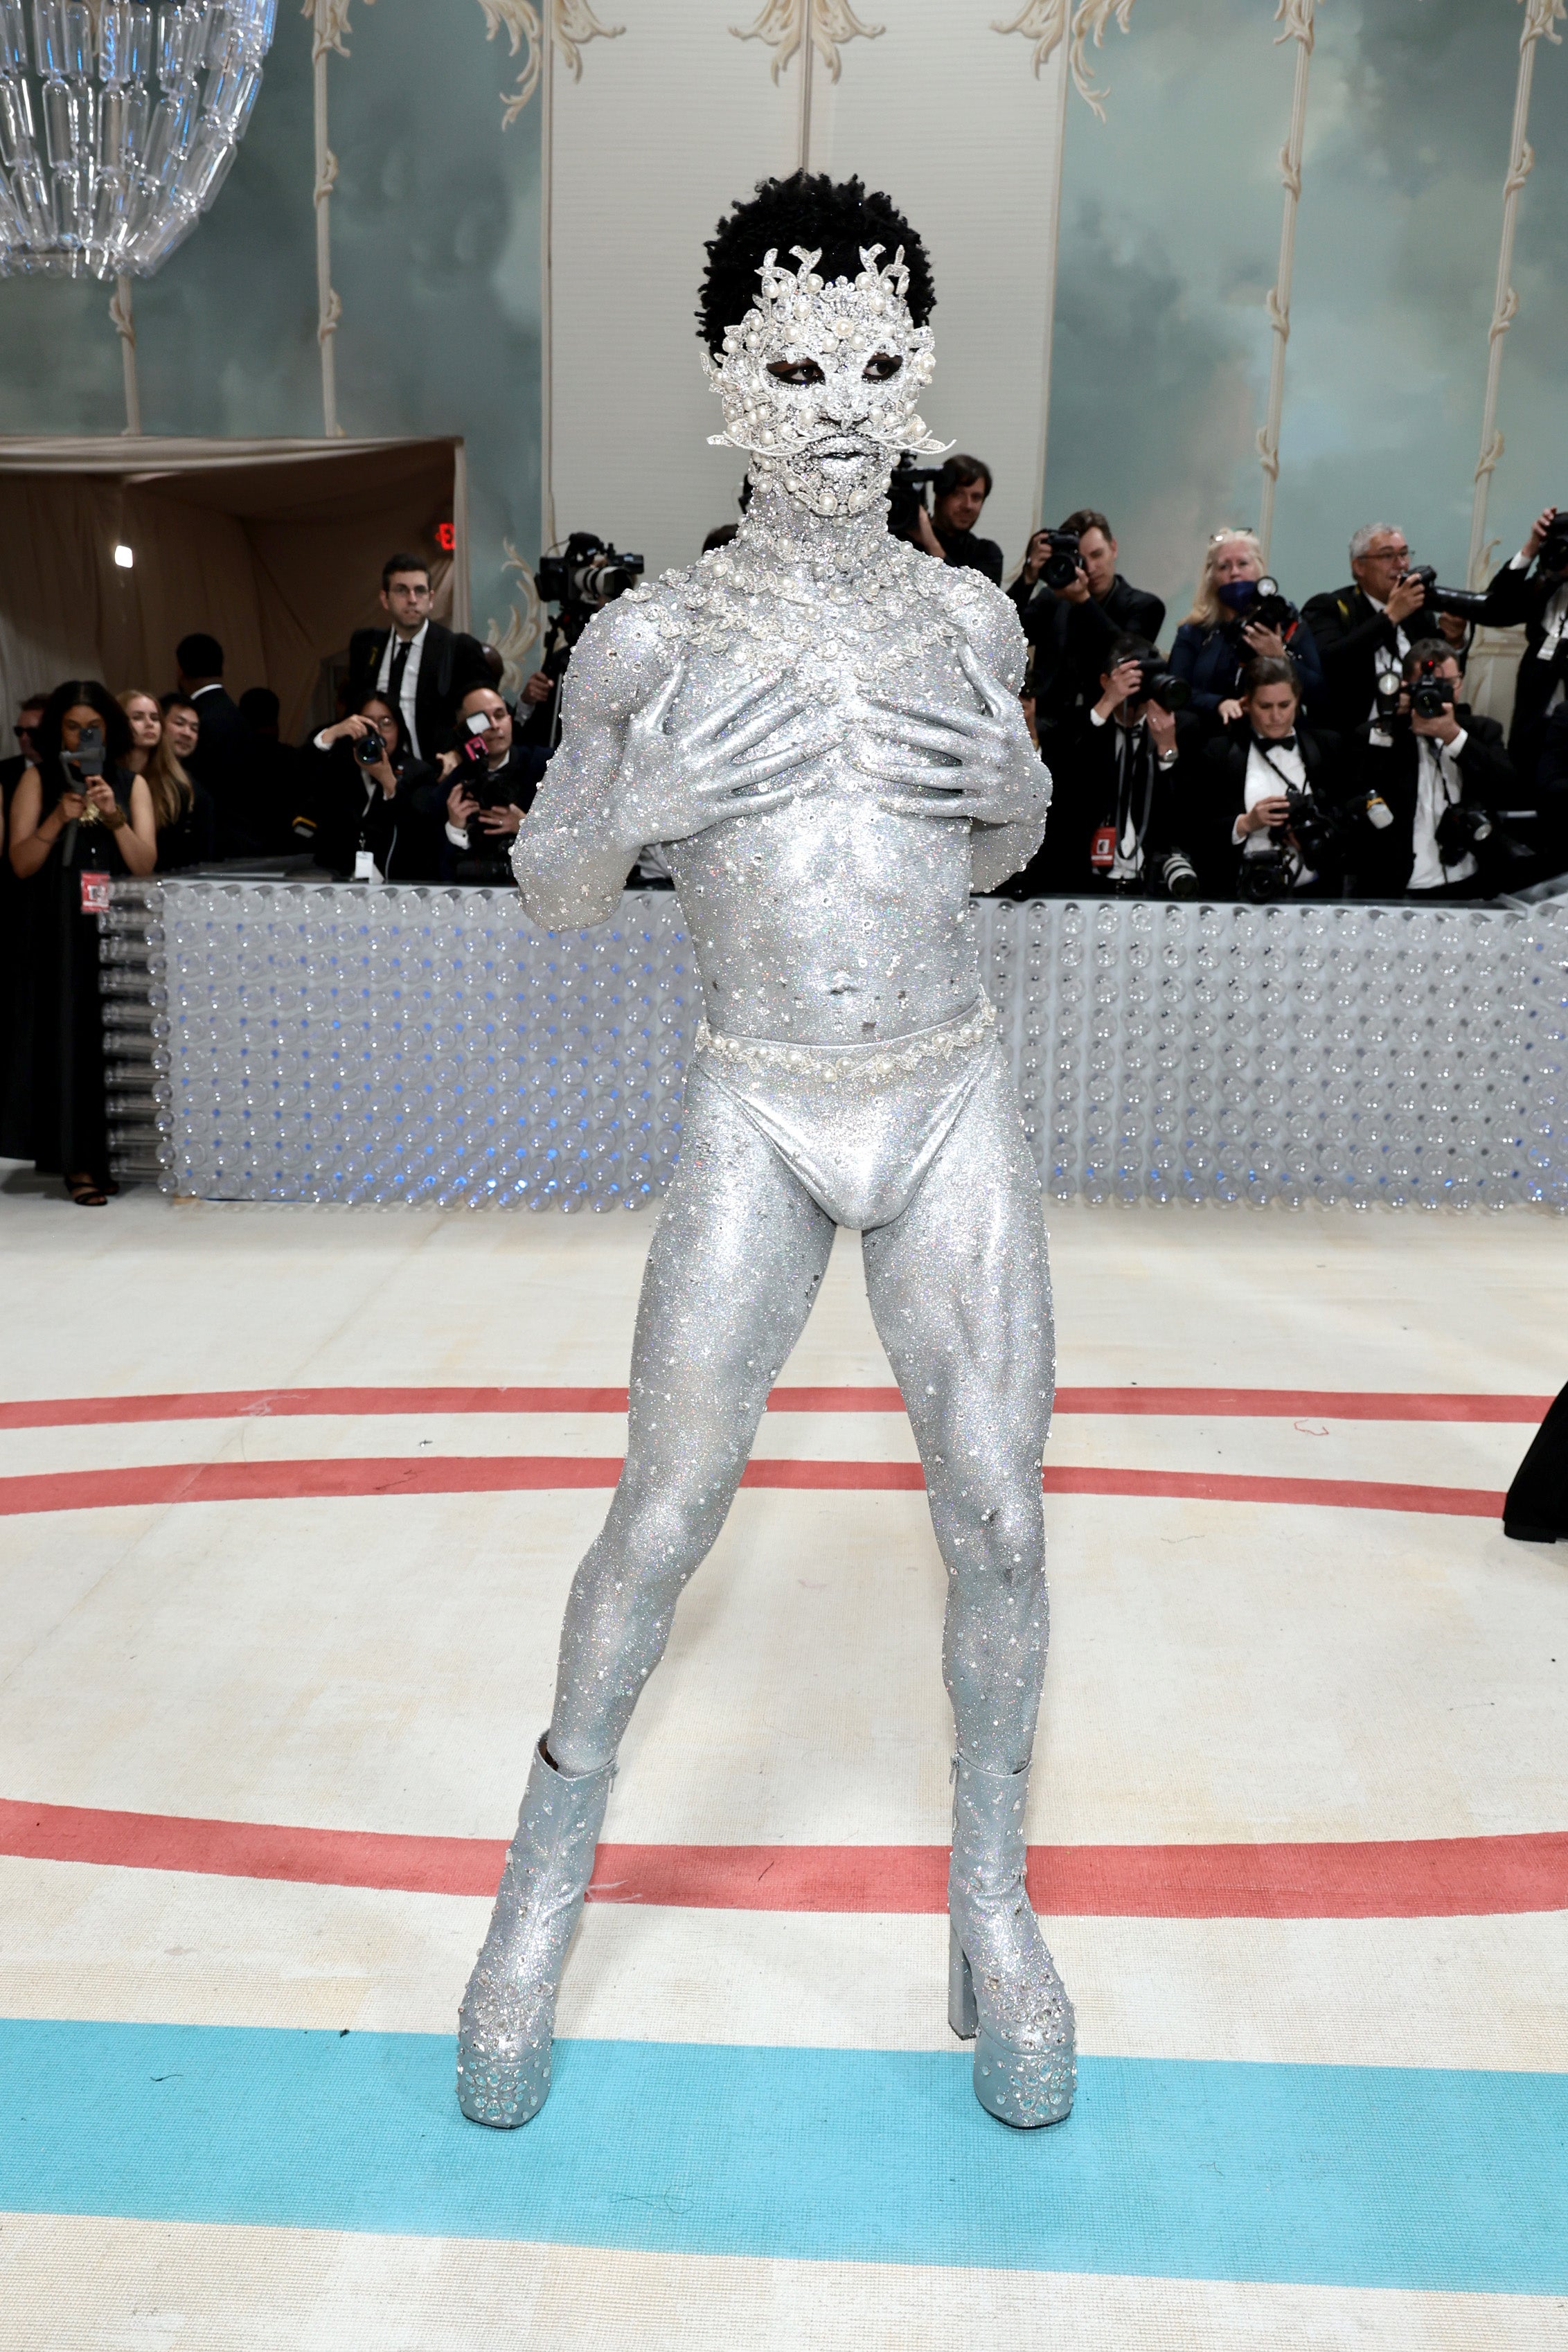 Lil Nas X showed up the 2023 Met Gala in nothing but silver underwear and metallic paint